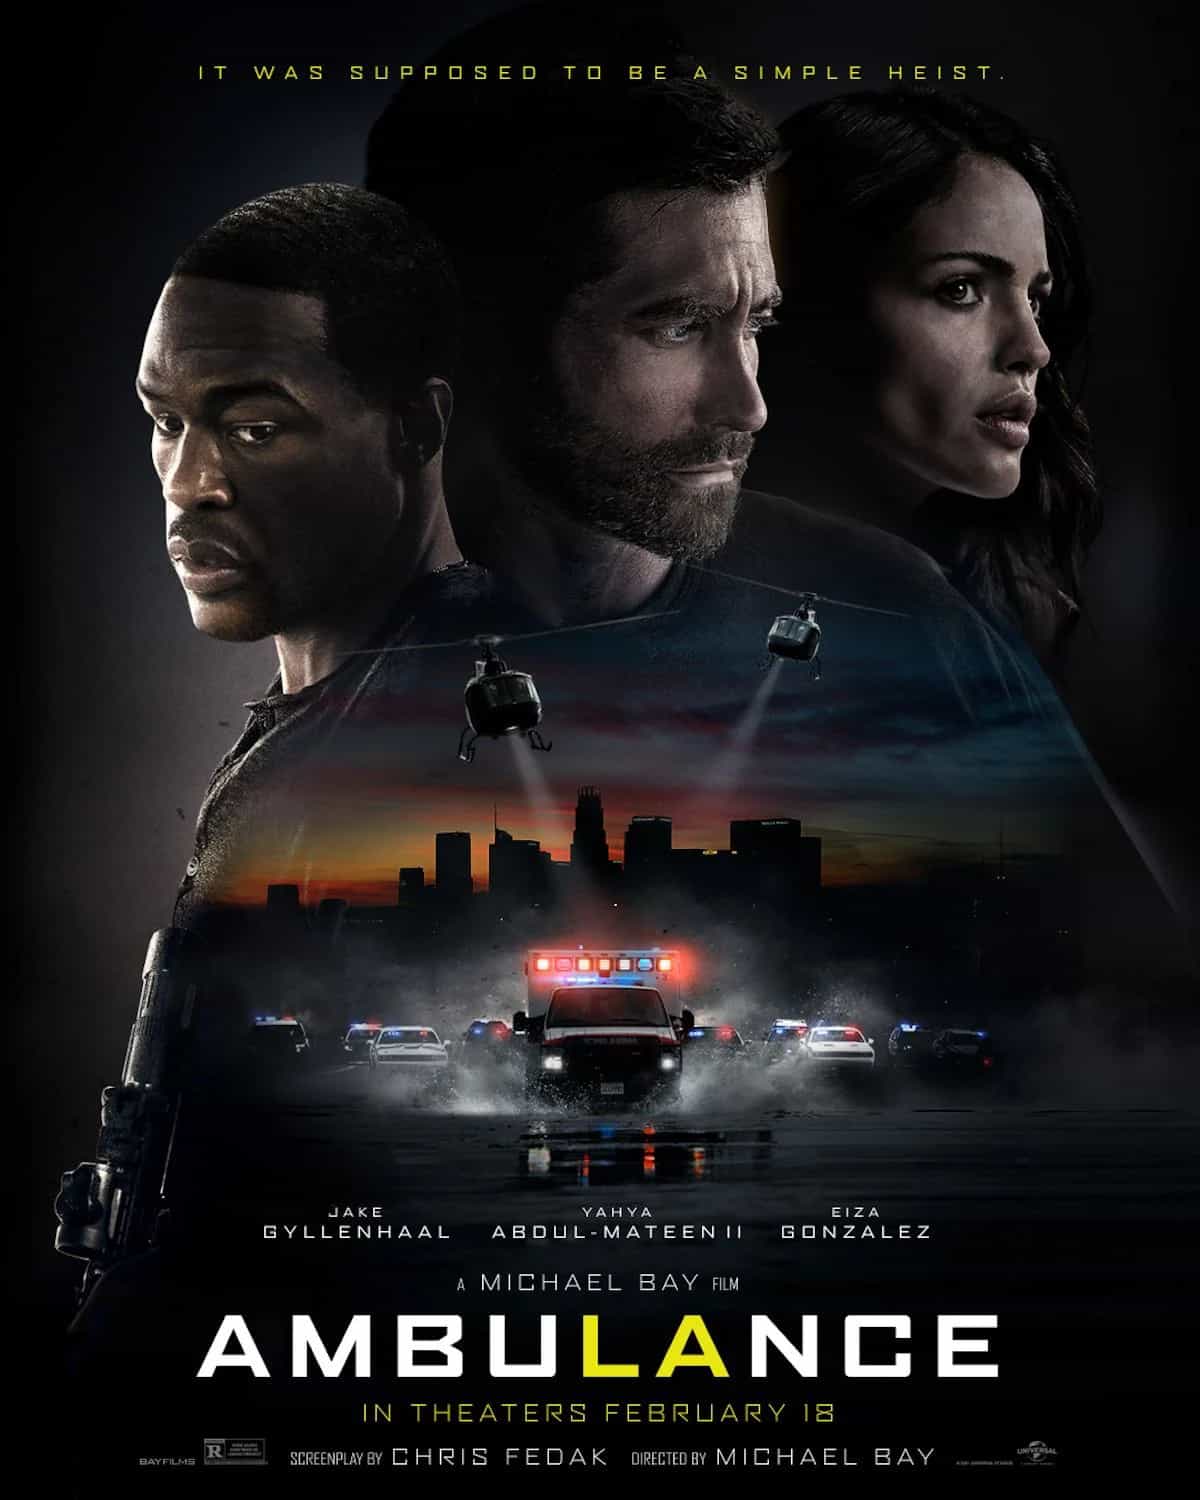 New poster released for Ambulance which stars Jake Gyllenhaal - the movie is released 18th February 2022 #ambulance